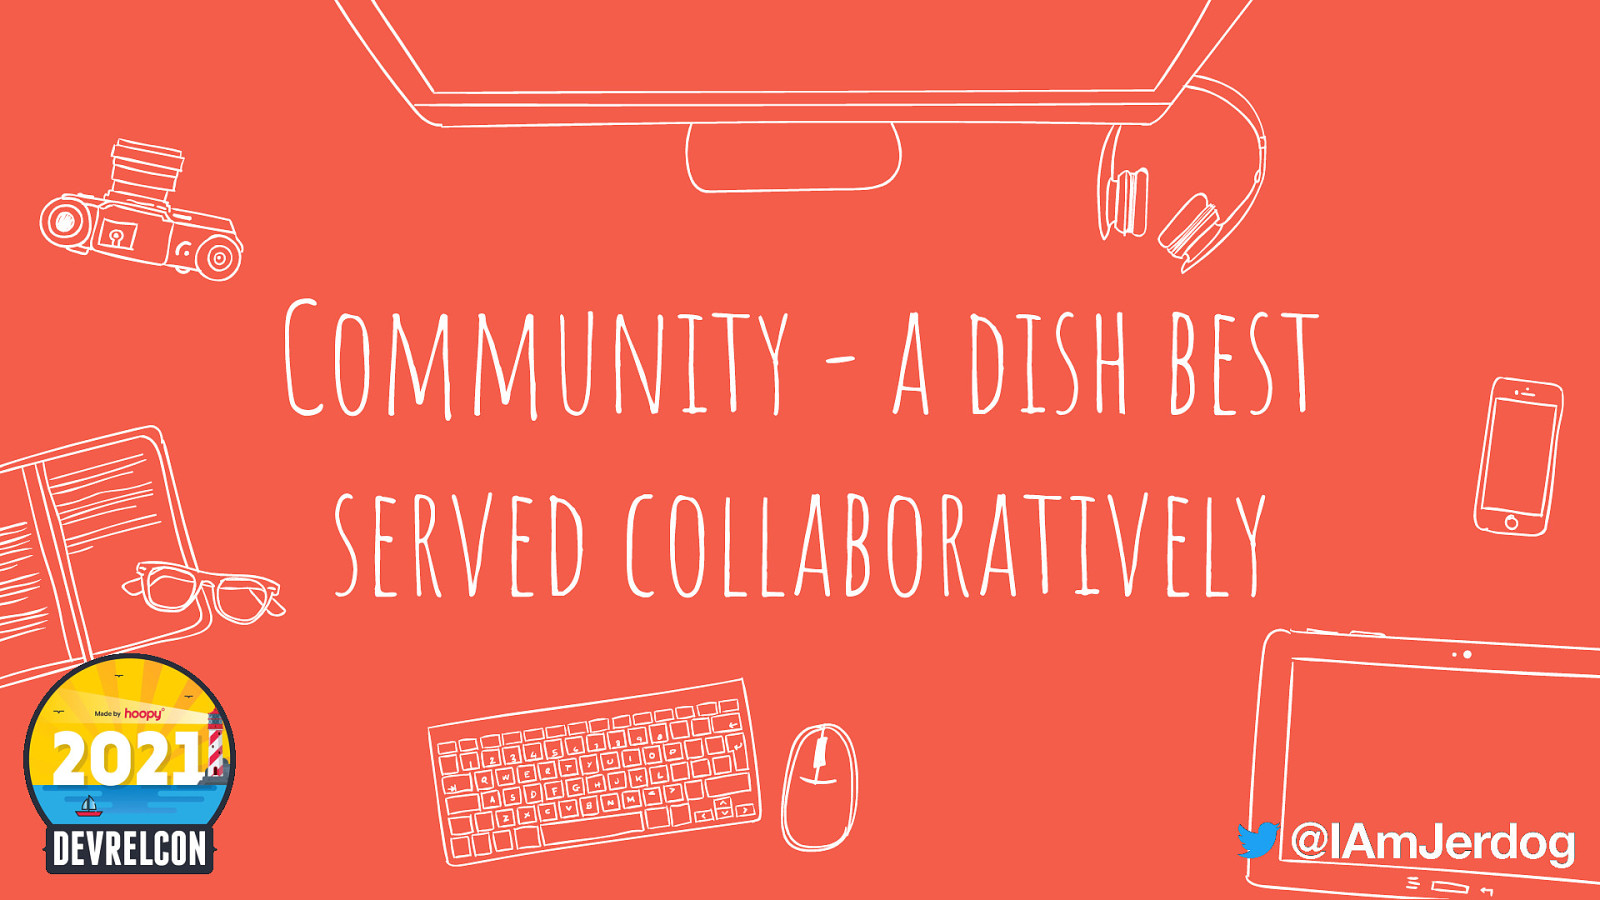 Community - a dish best served collaboratively